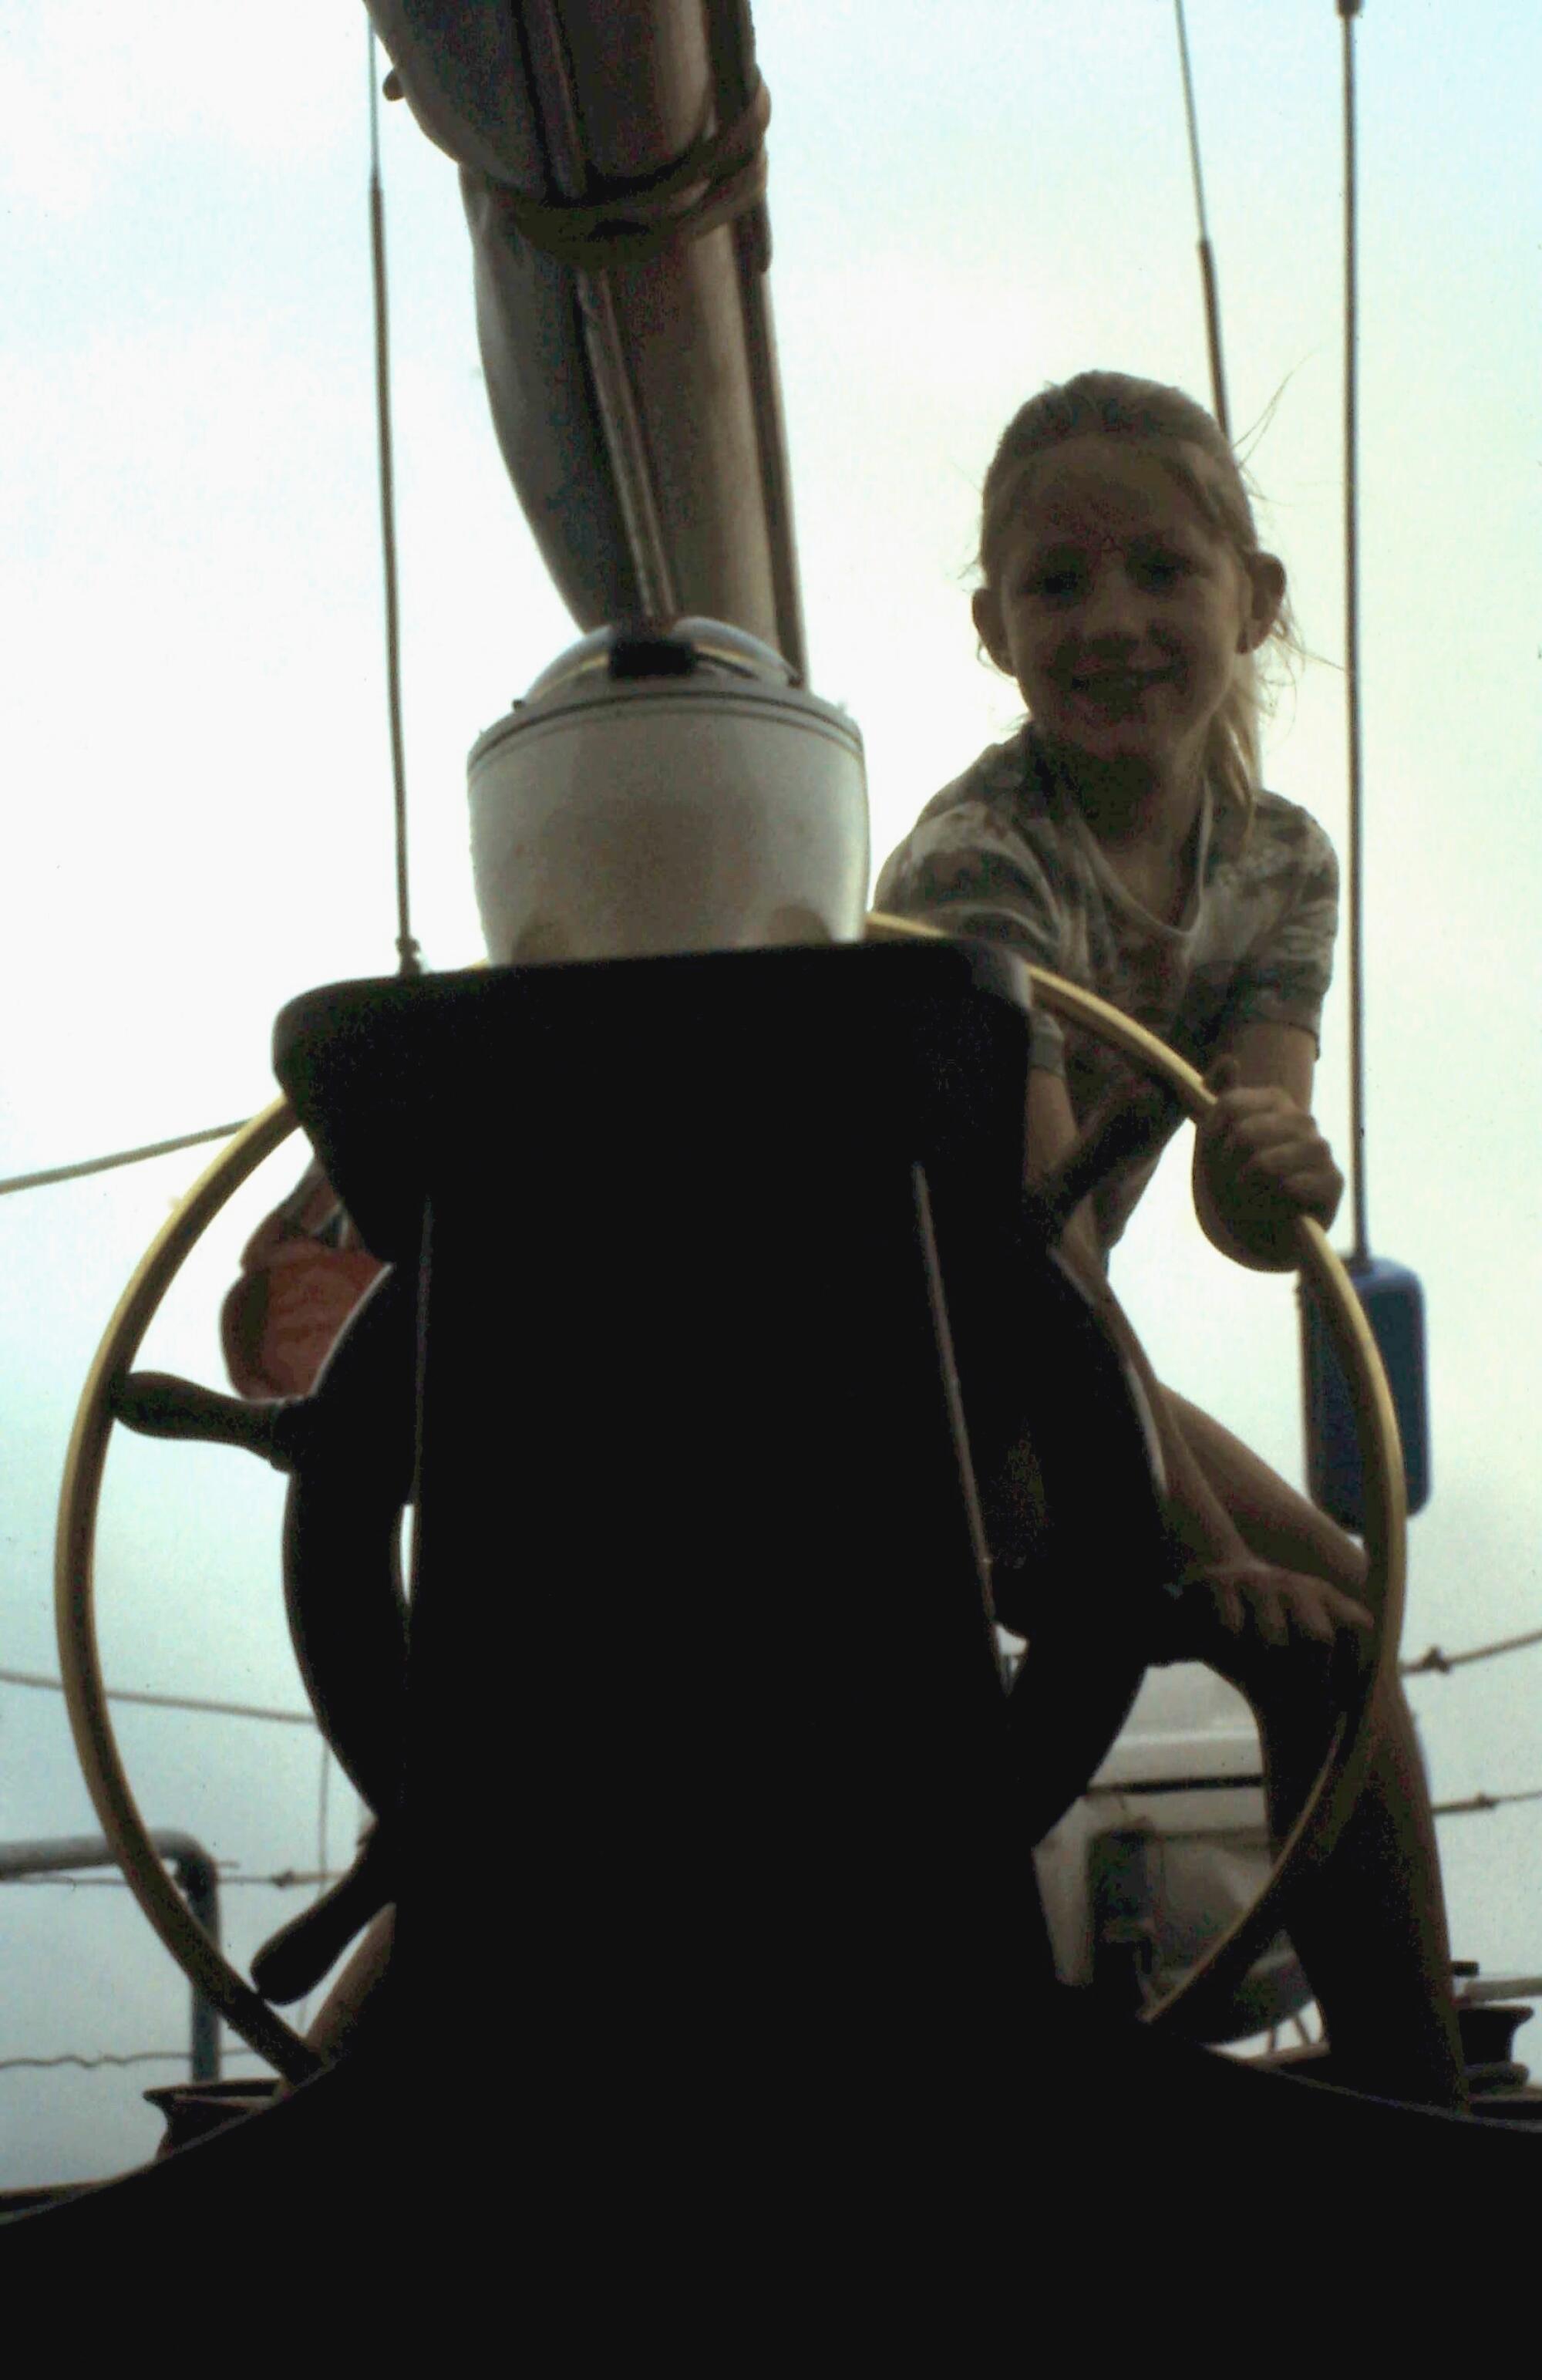 Suzanne Heywood at 8, trying her hand at steering a boat.